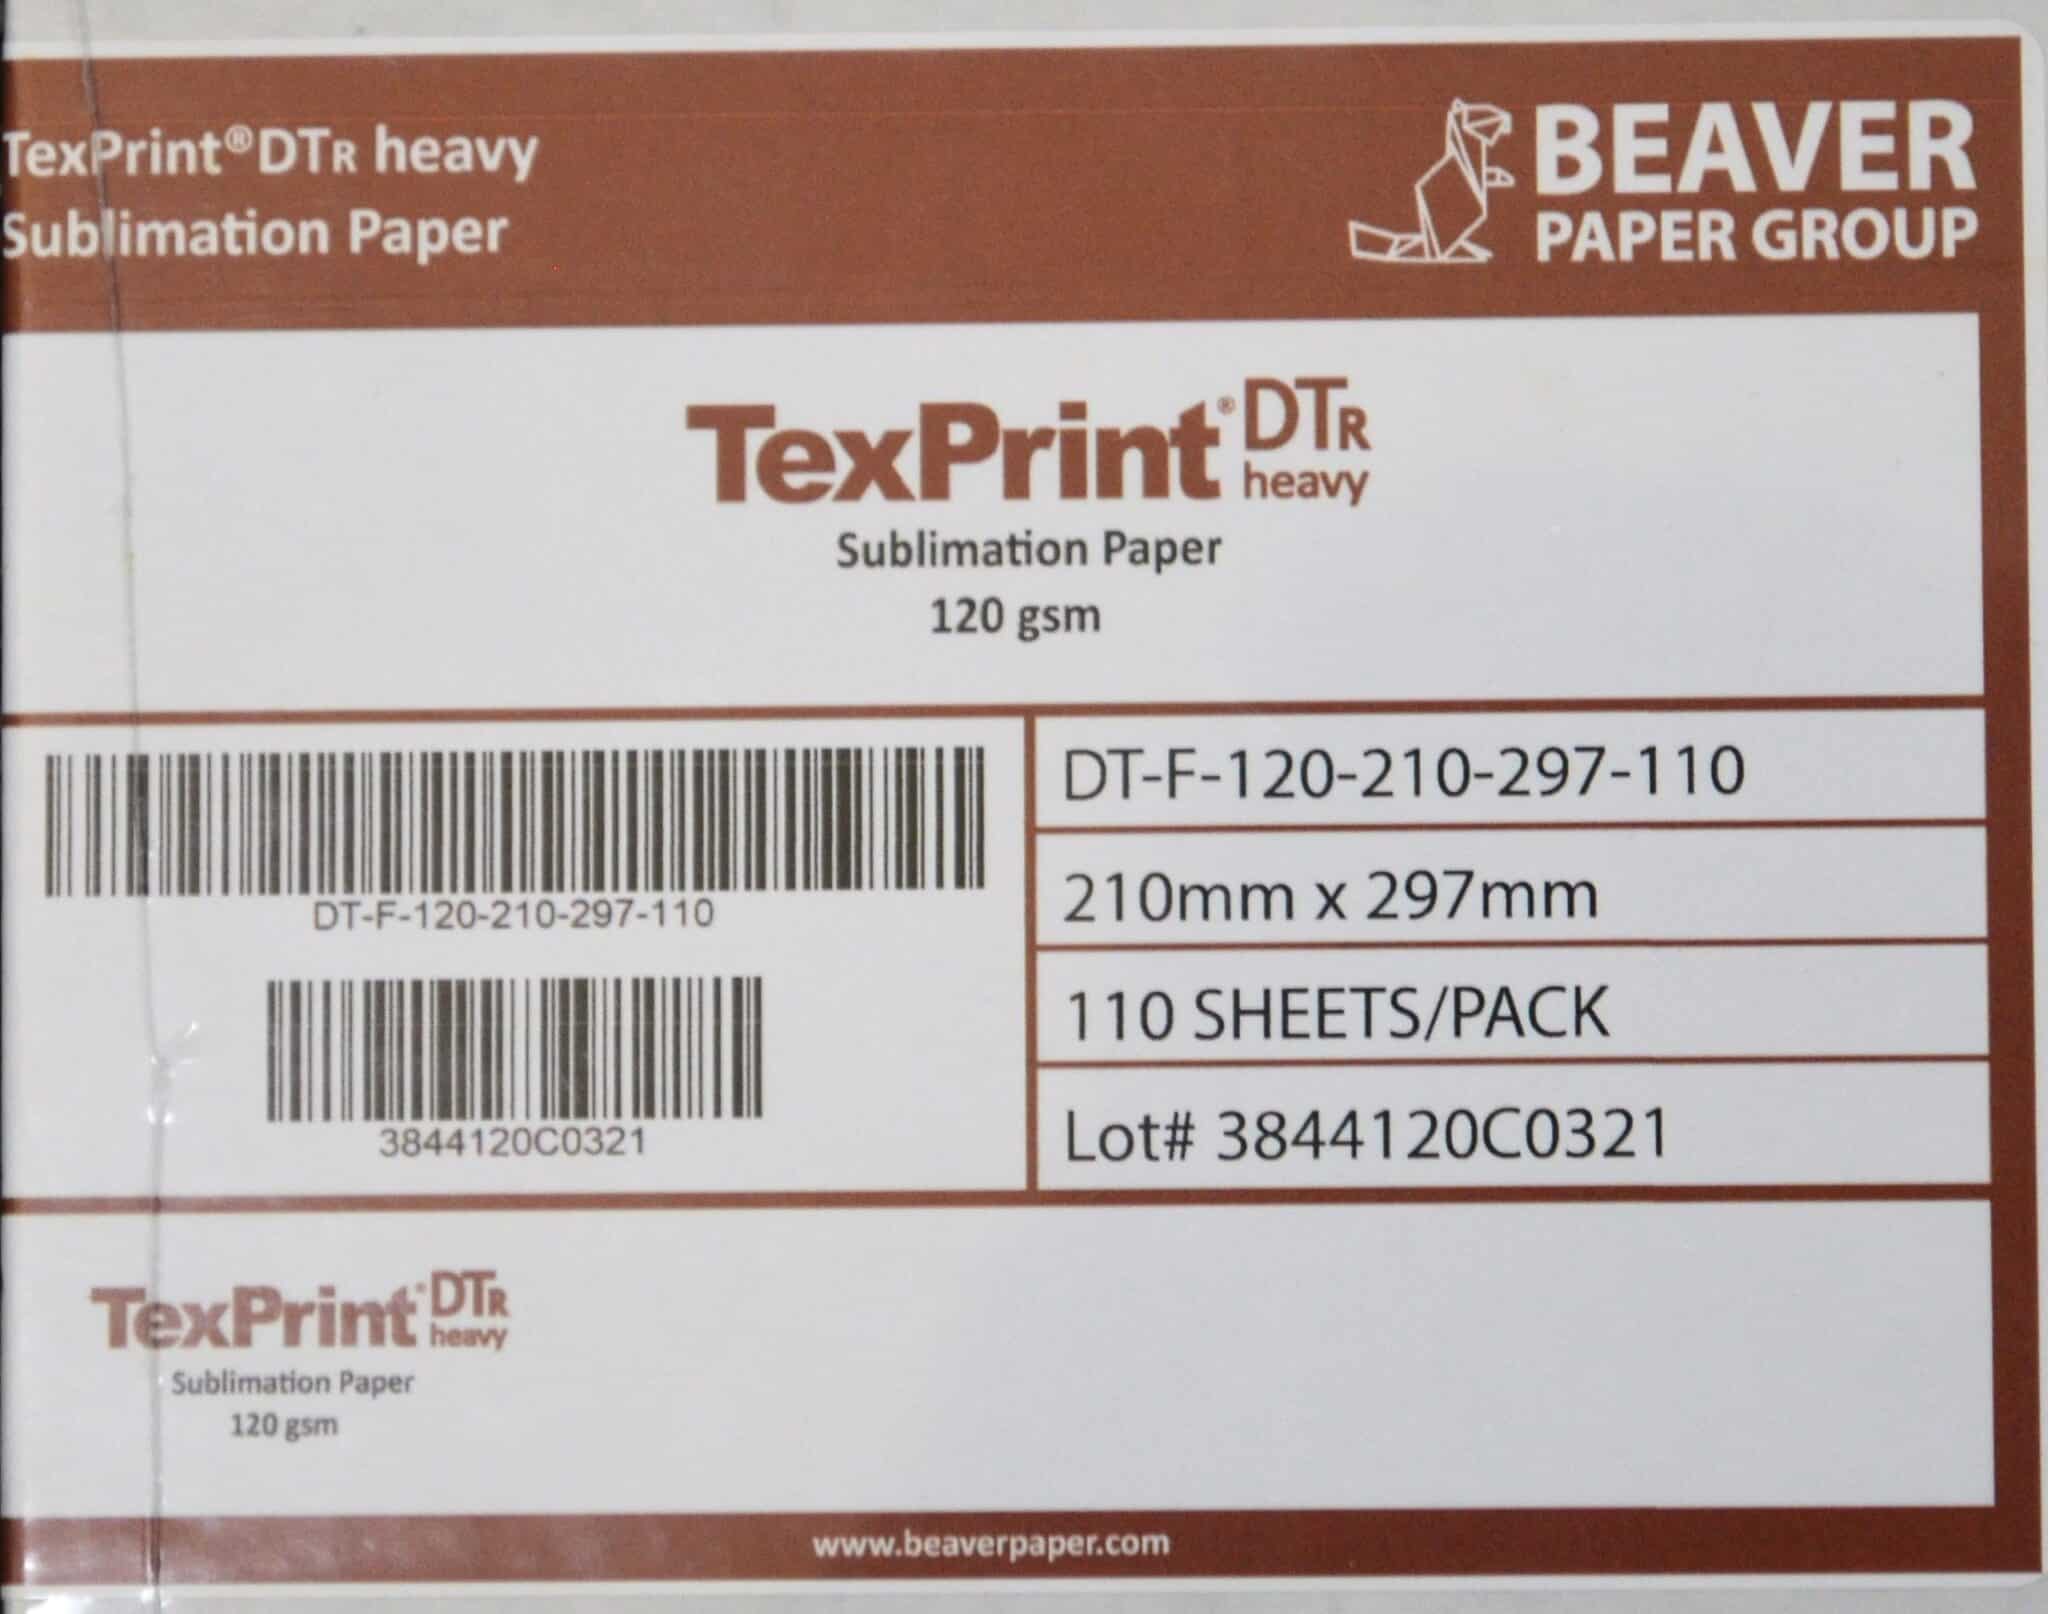  Beaver TexPrint DT Heavy -Replaces R- for Ricoh and